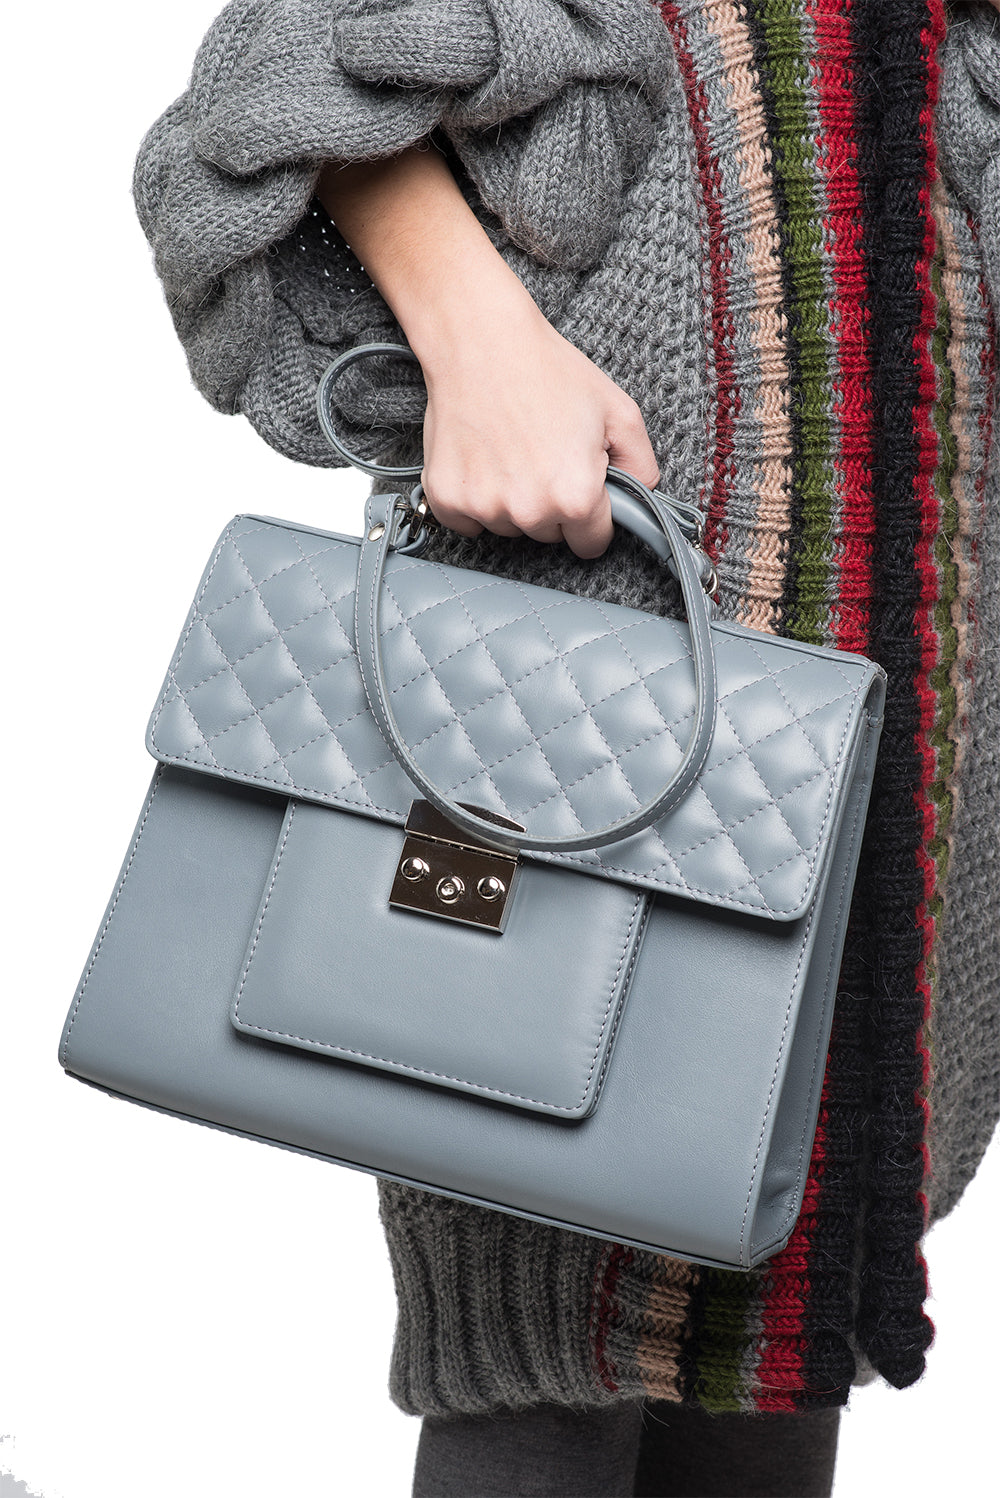  Model with a quilted leather handbag - Grey 